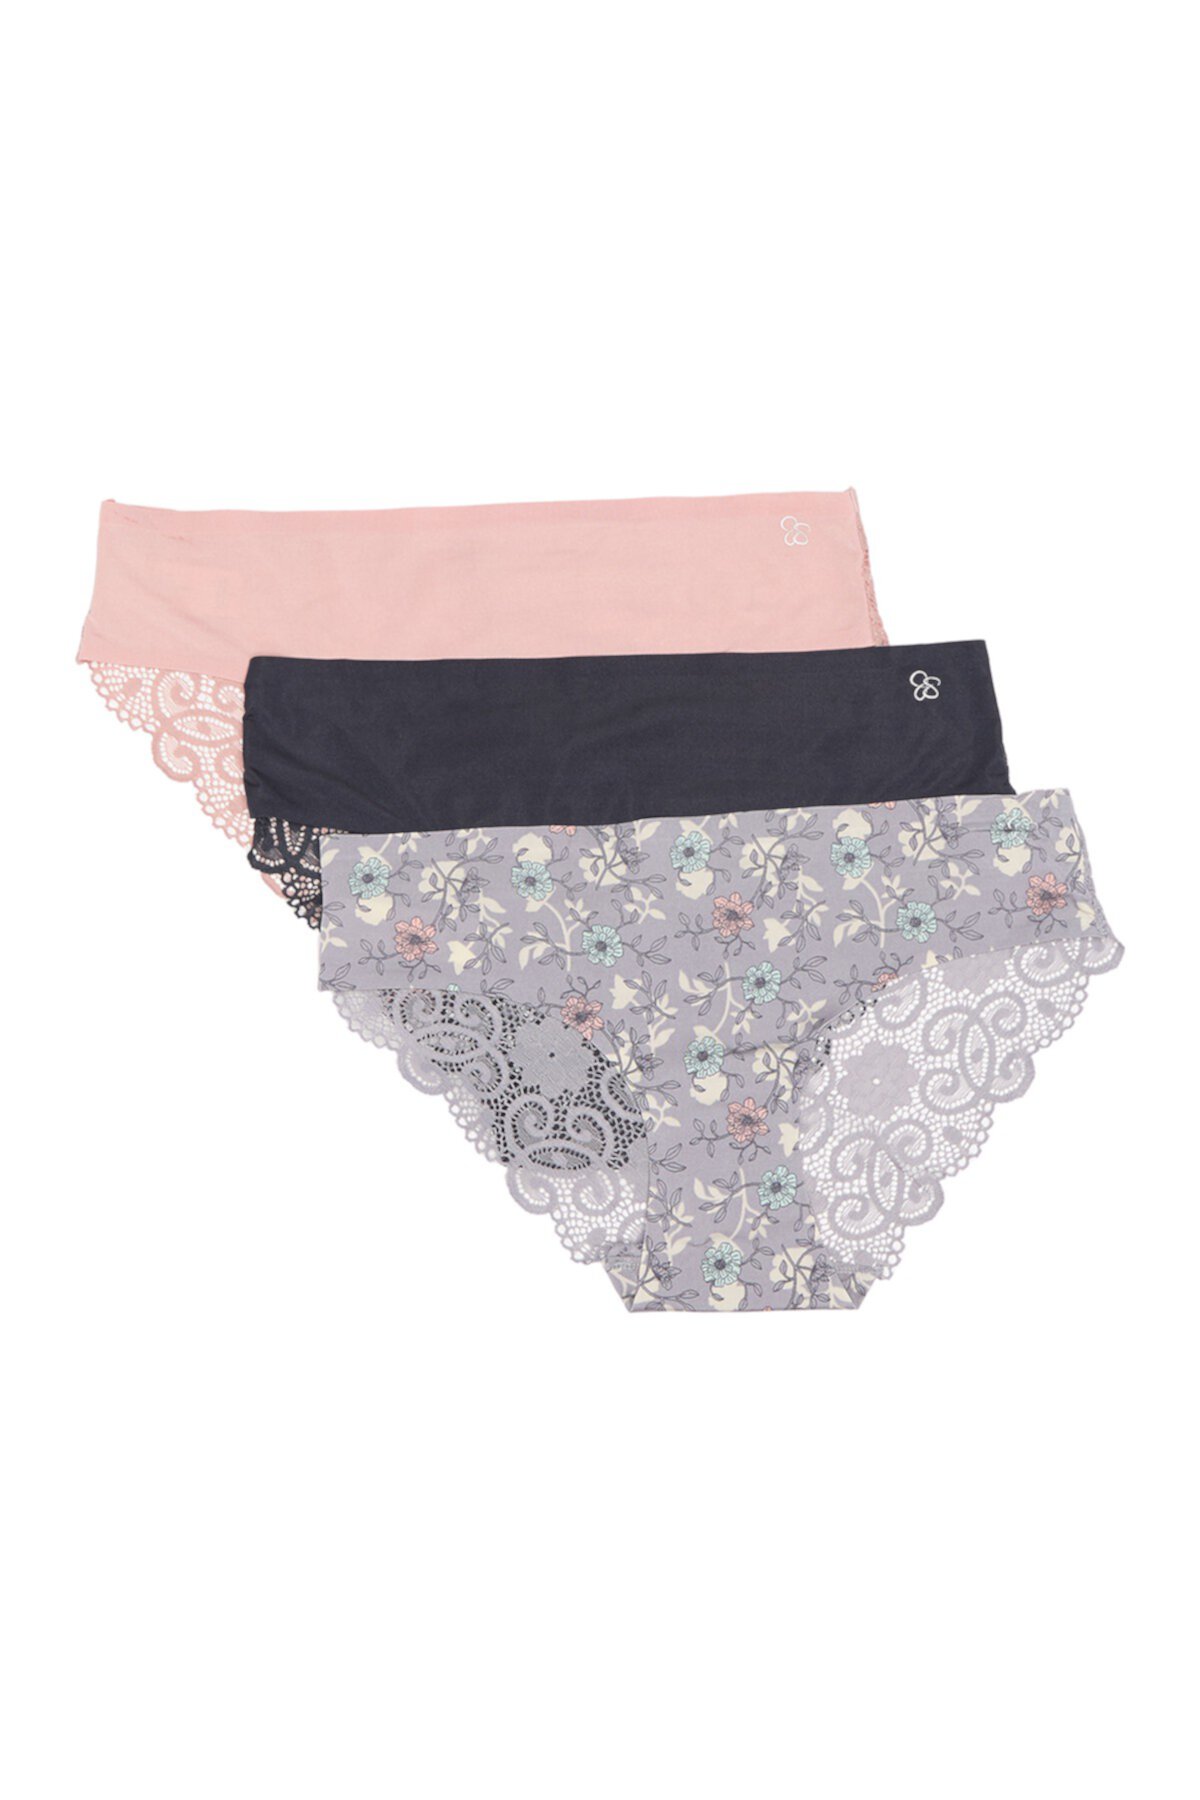 Lace Back Hipster - Pack of 3 Jessica Simpson